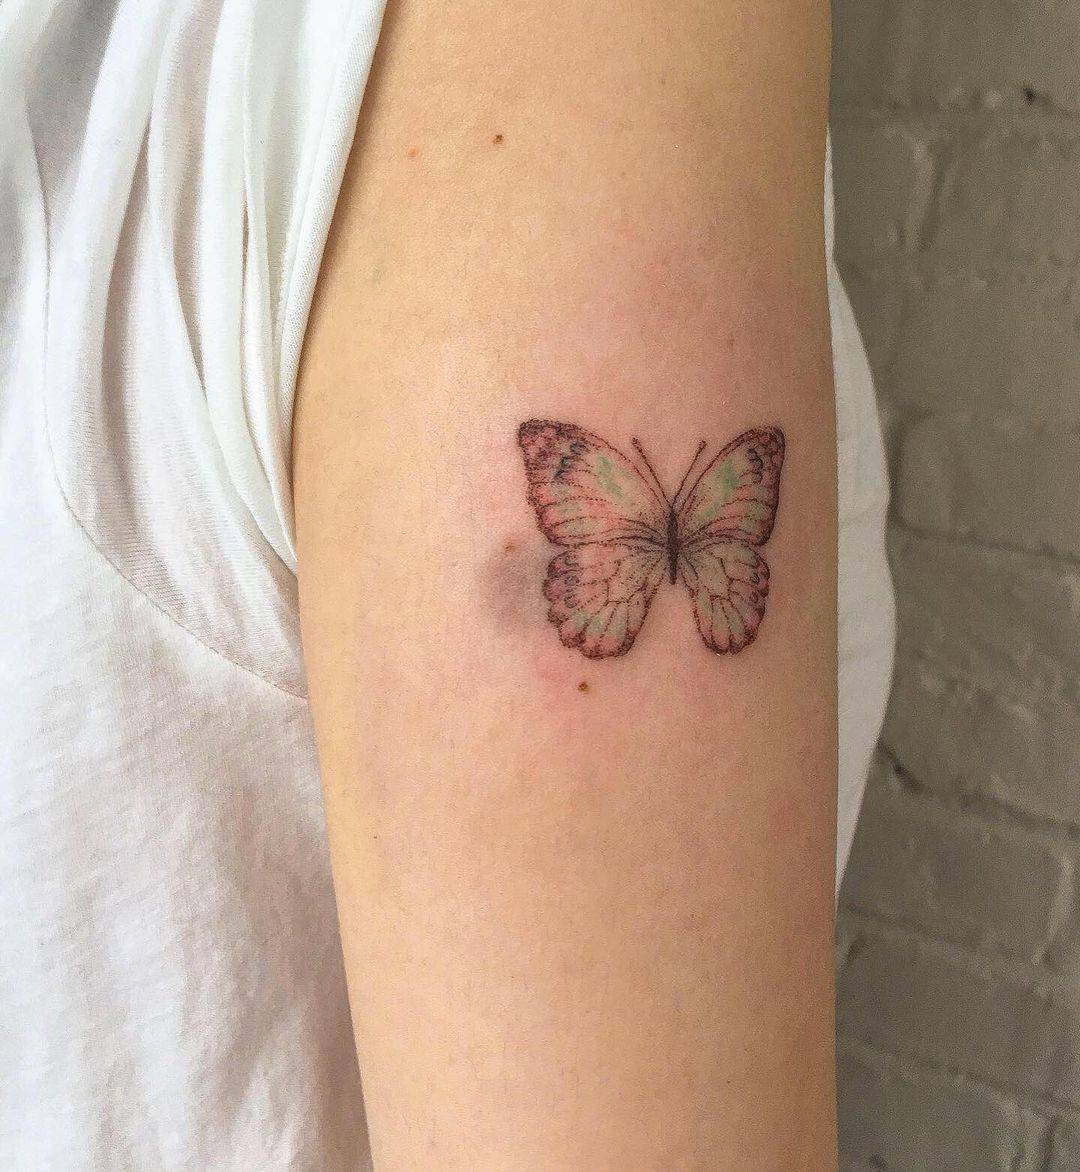 cover Birthmarks with a butterfly tattoo